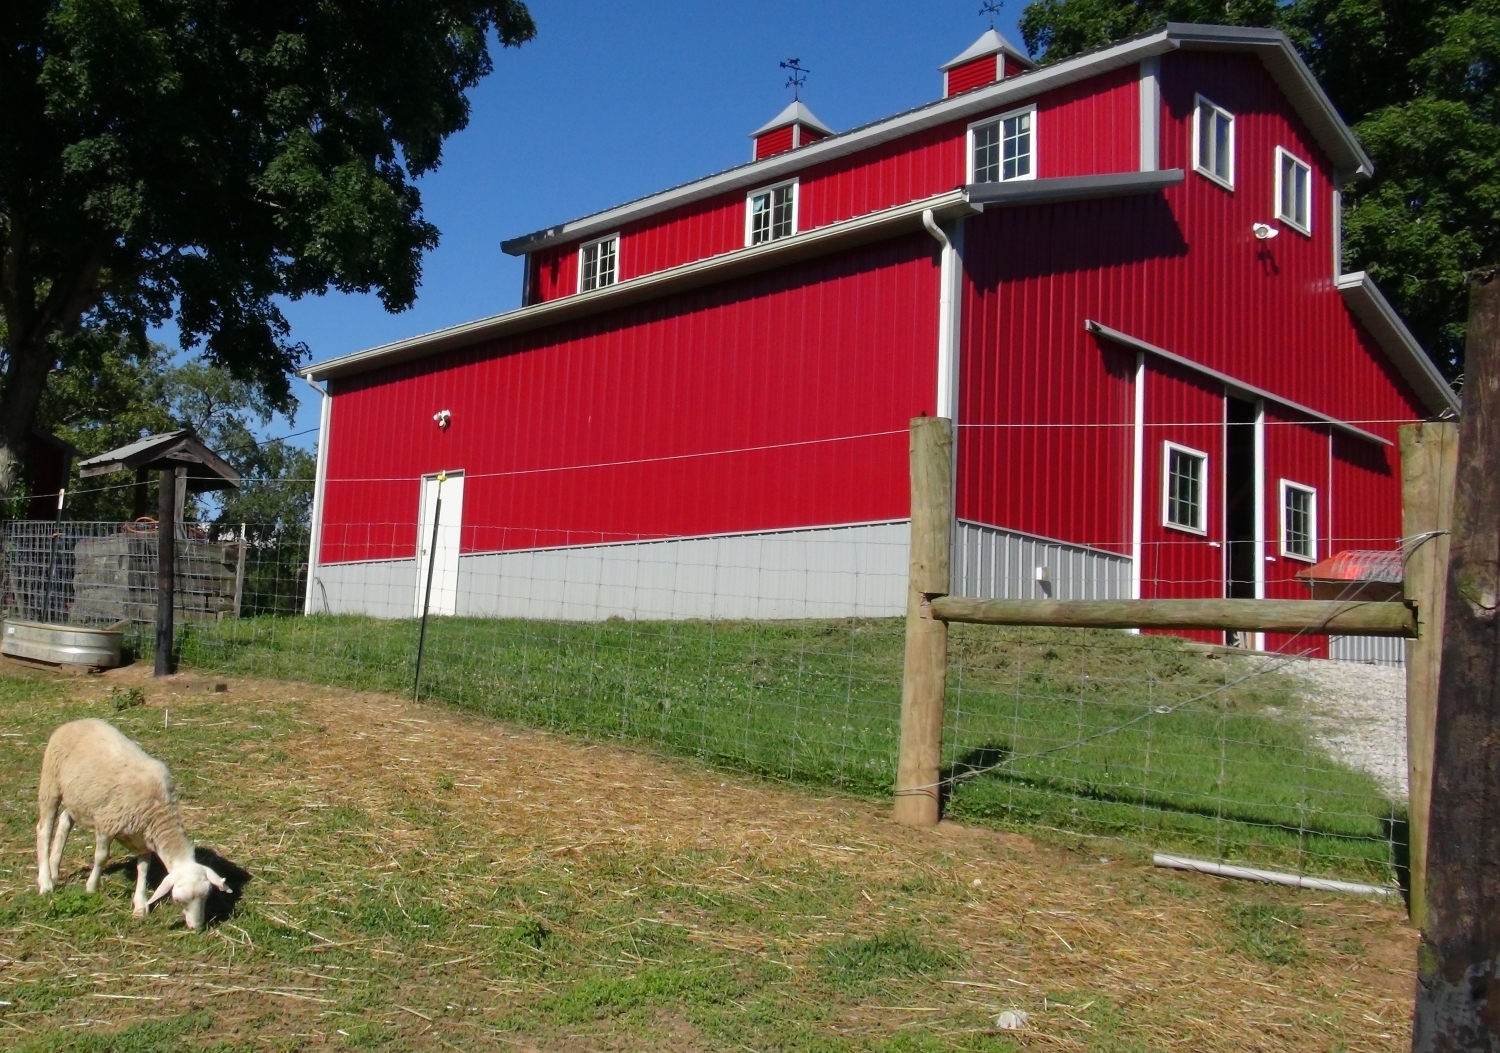 Red agricultural barn with cupolas